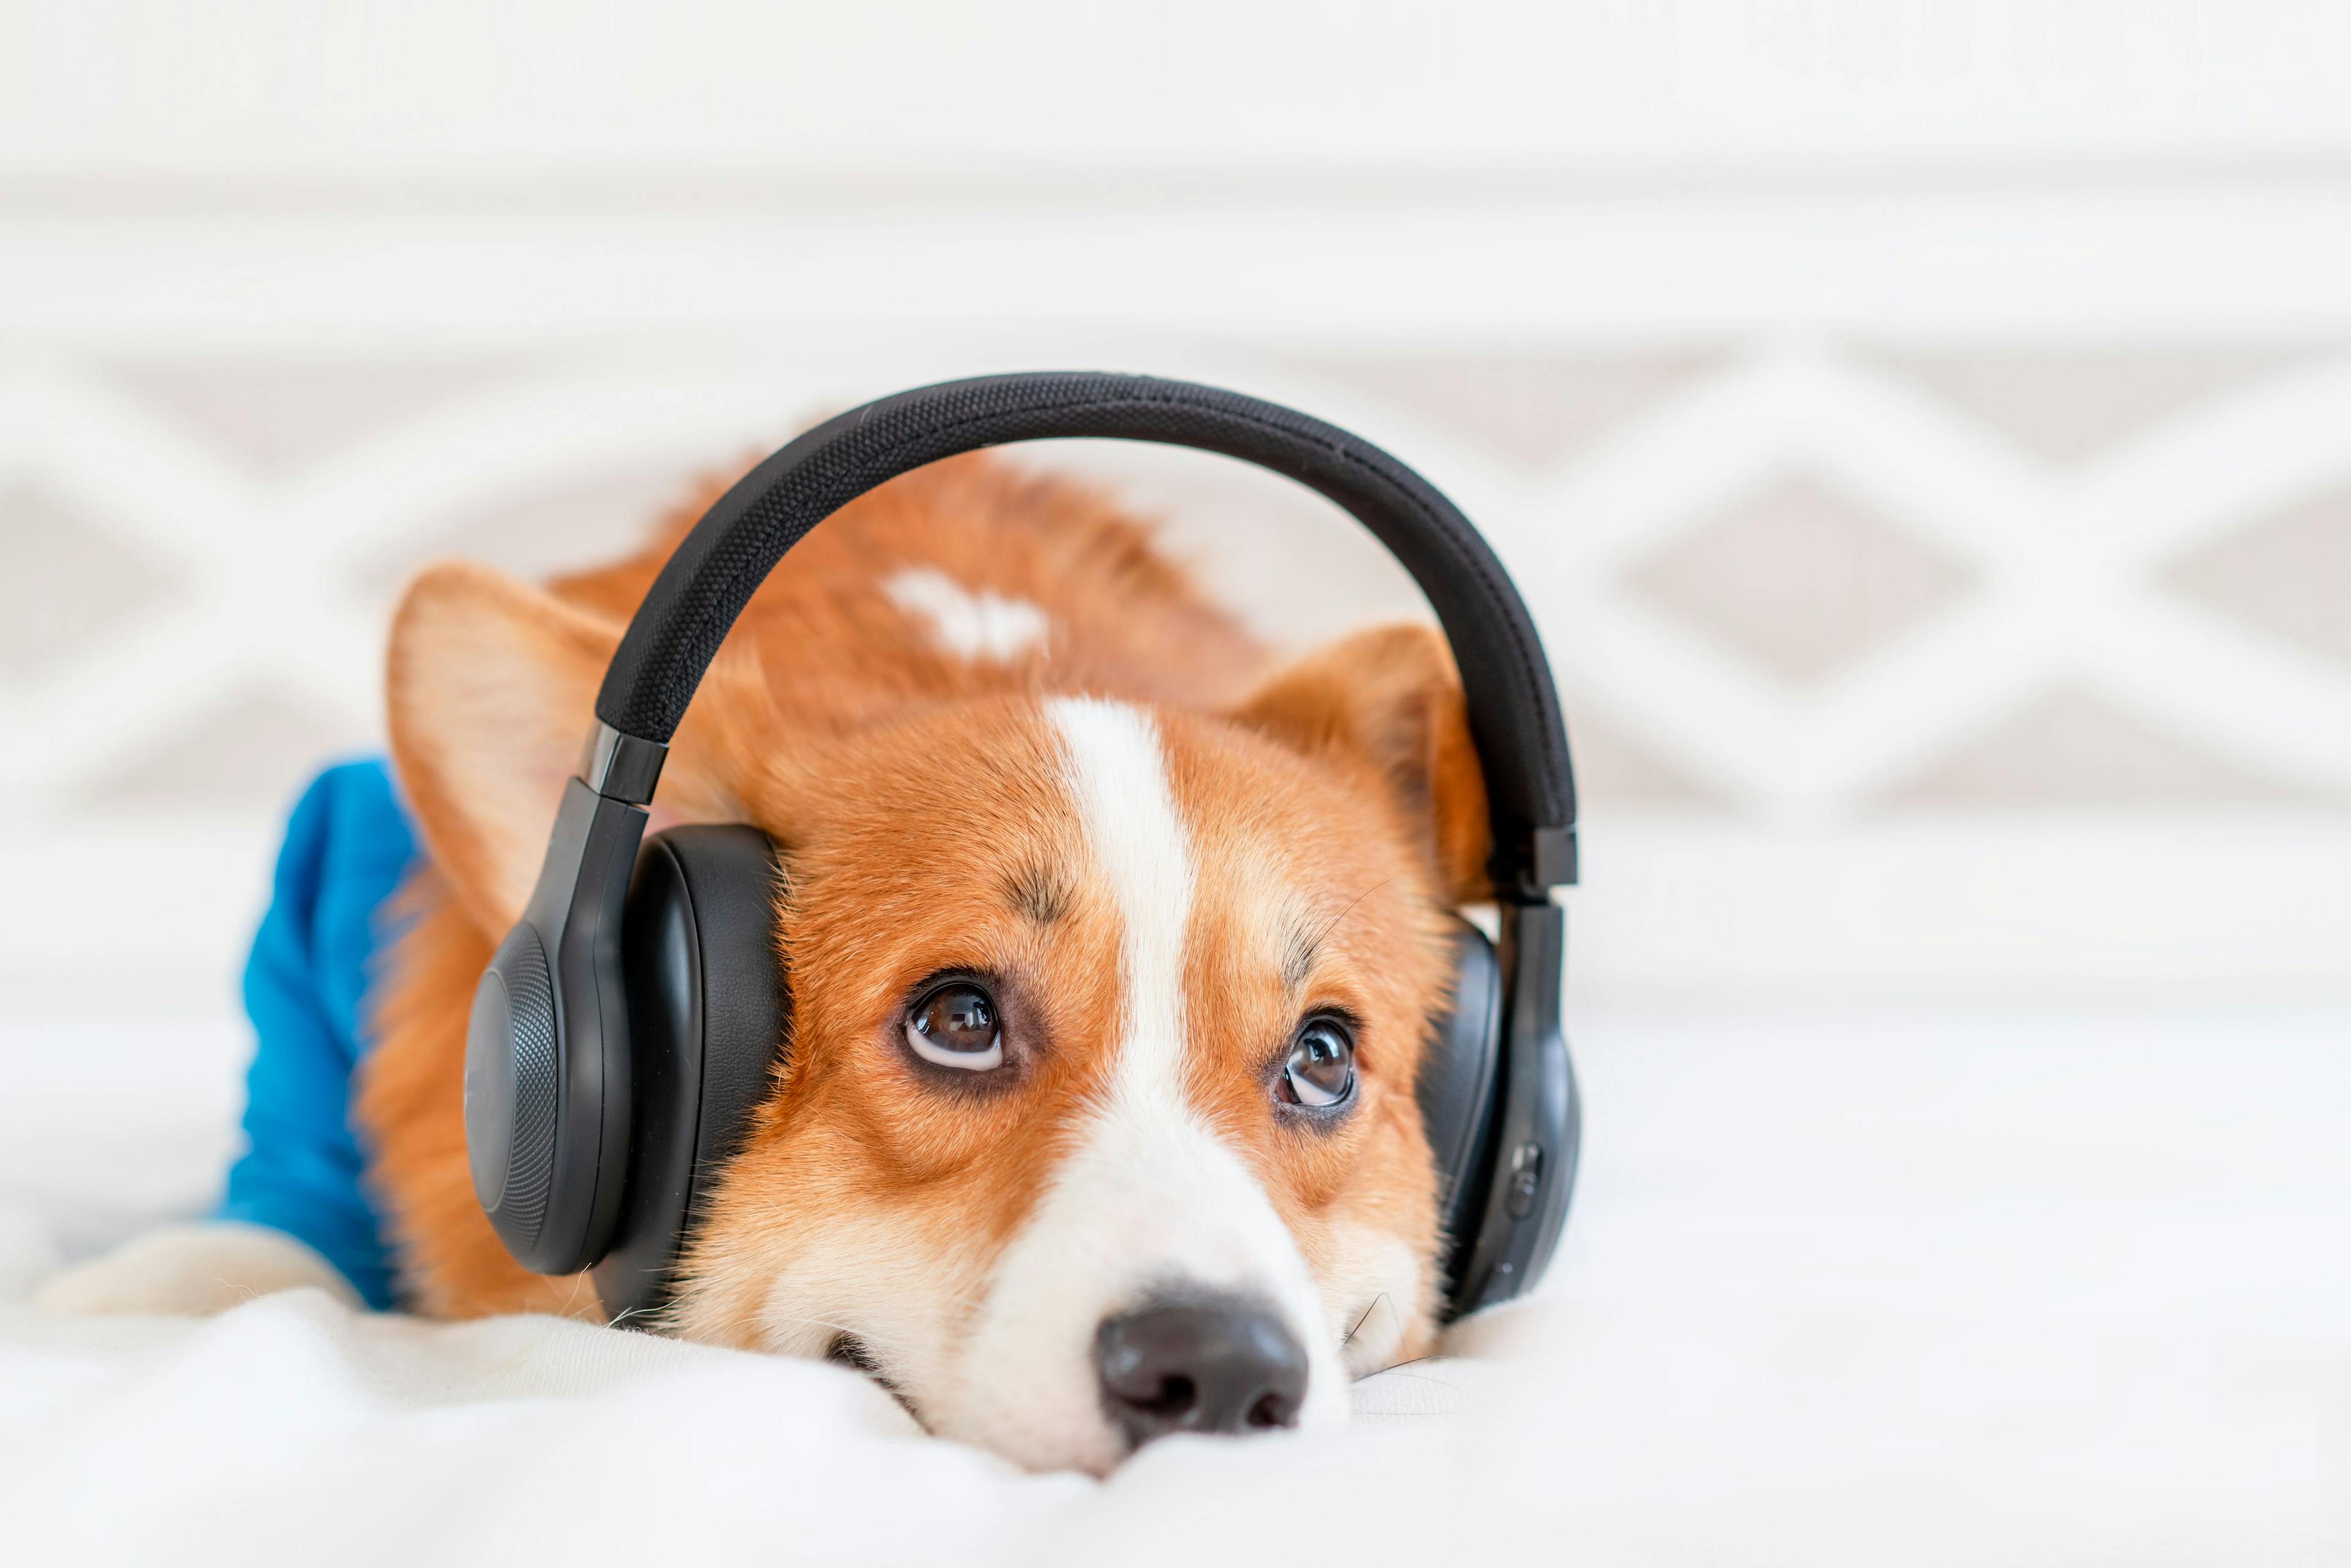 What effect does music have on dogs?